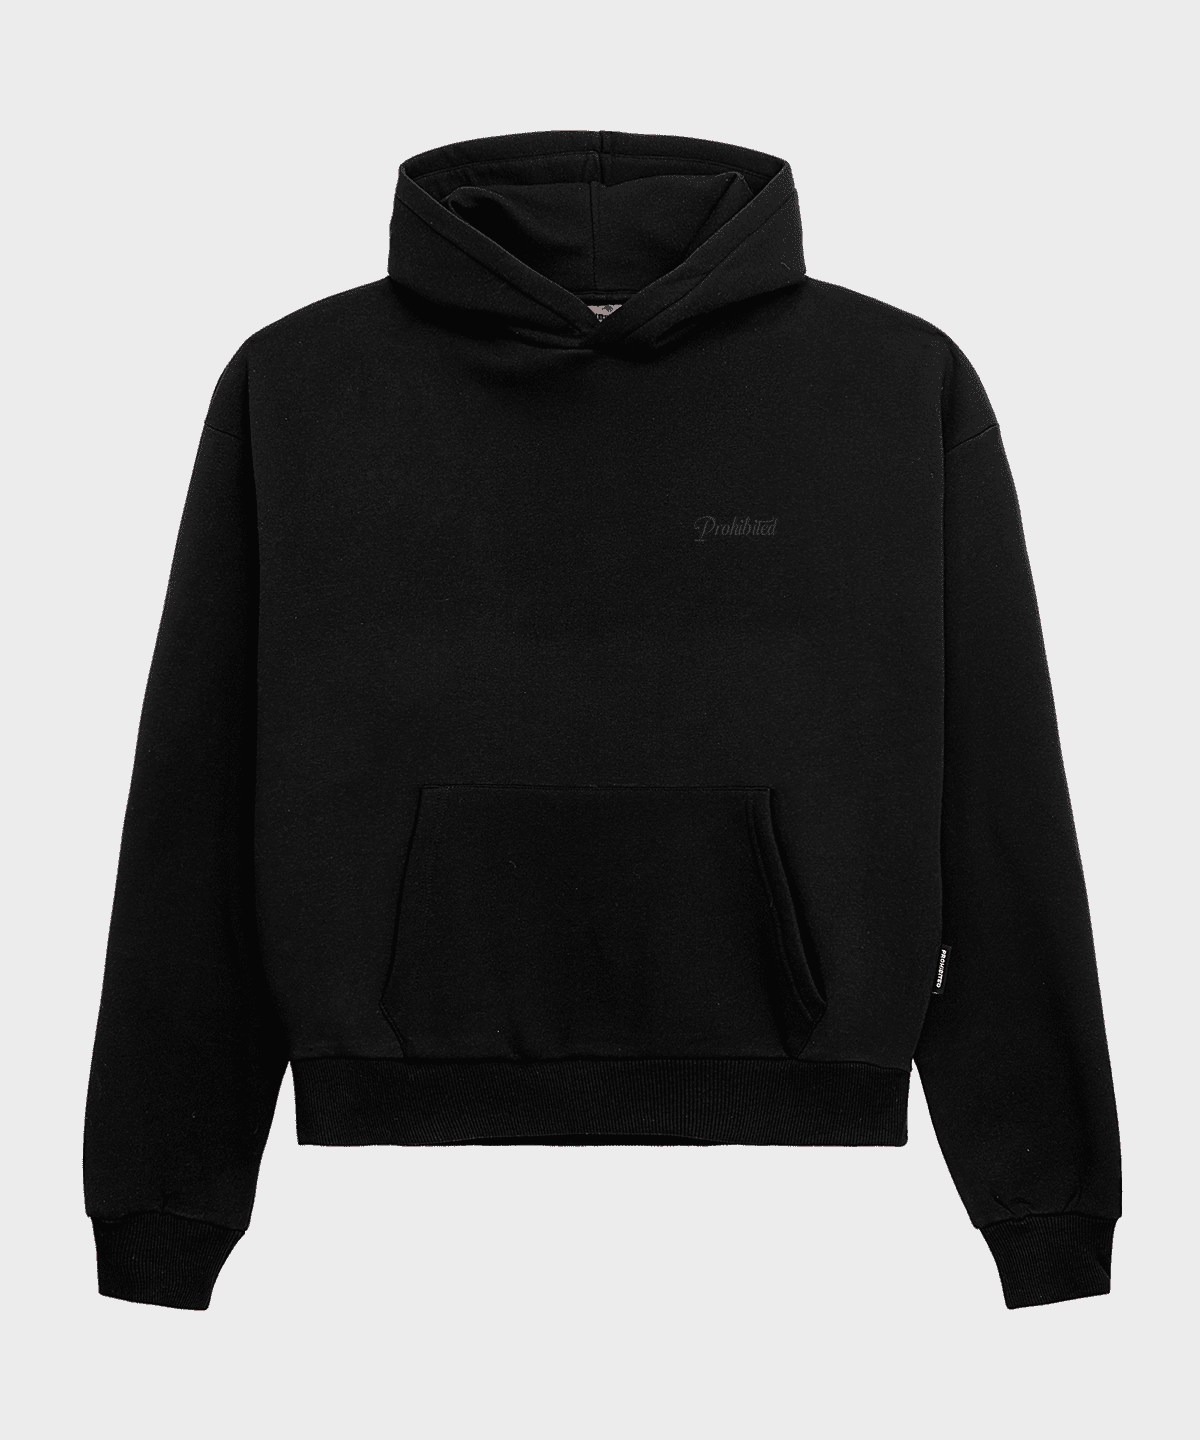 10119 HOODIE EMBROIDERY